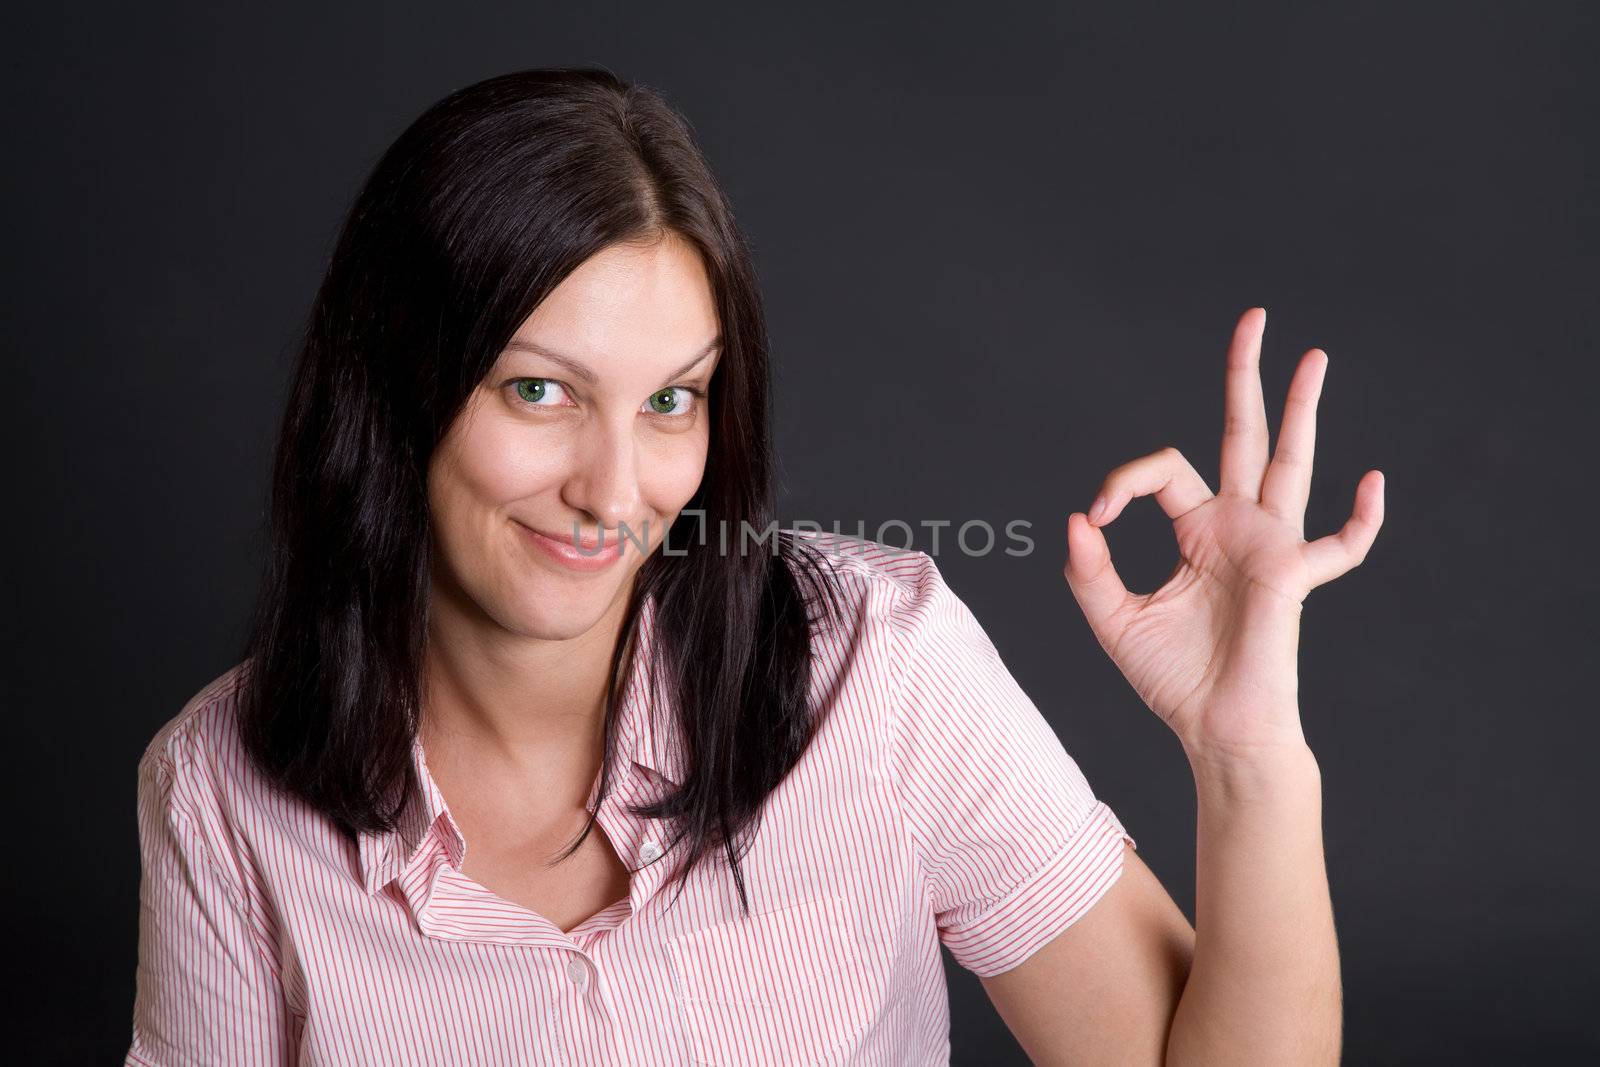 Smling girl showing ok sign with fingers over gray